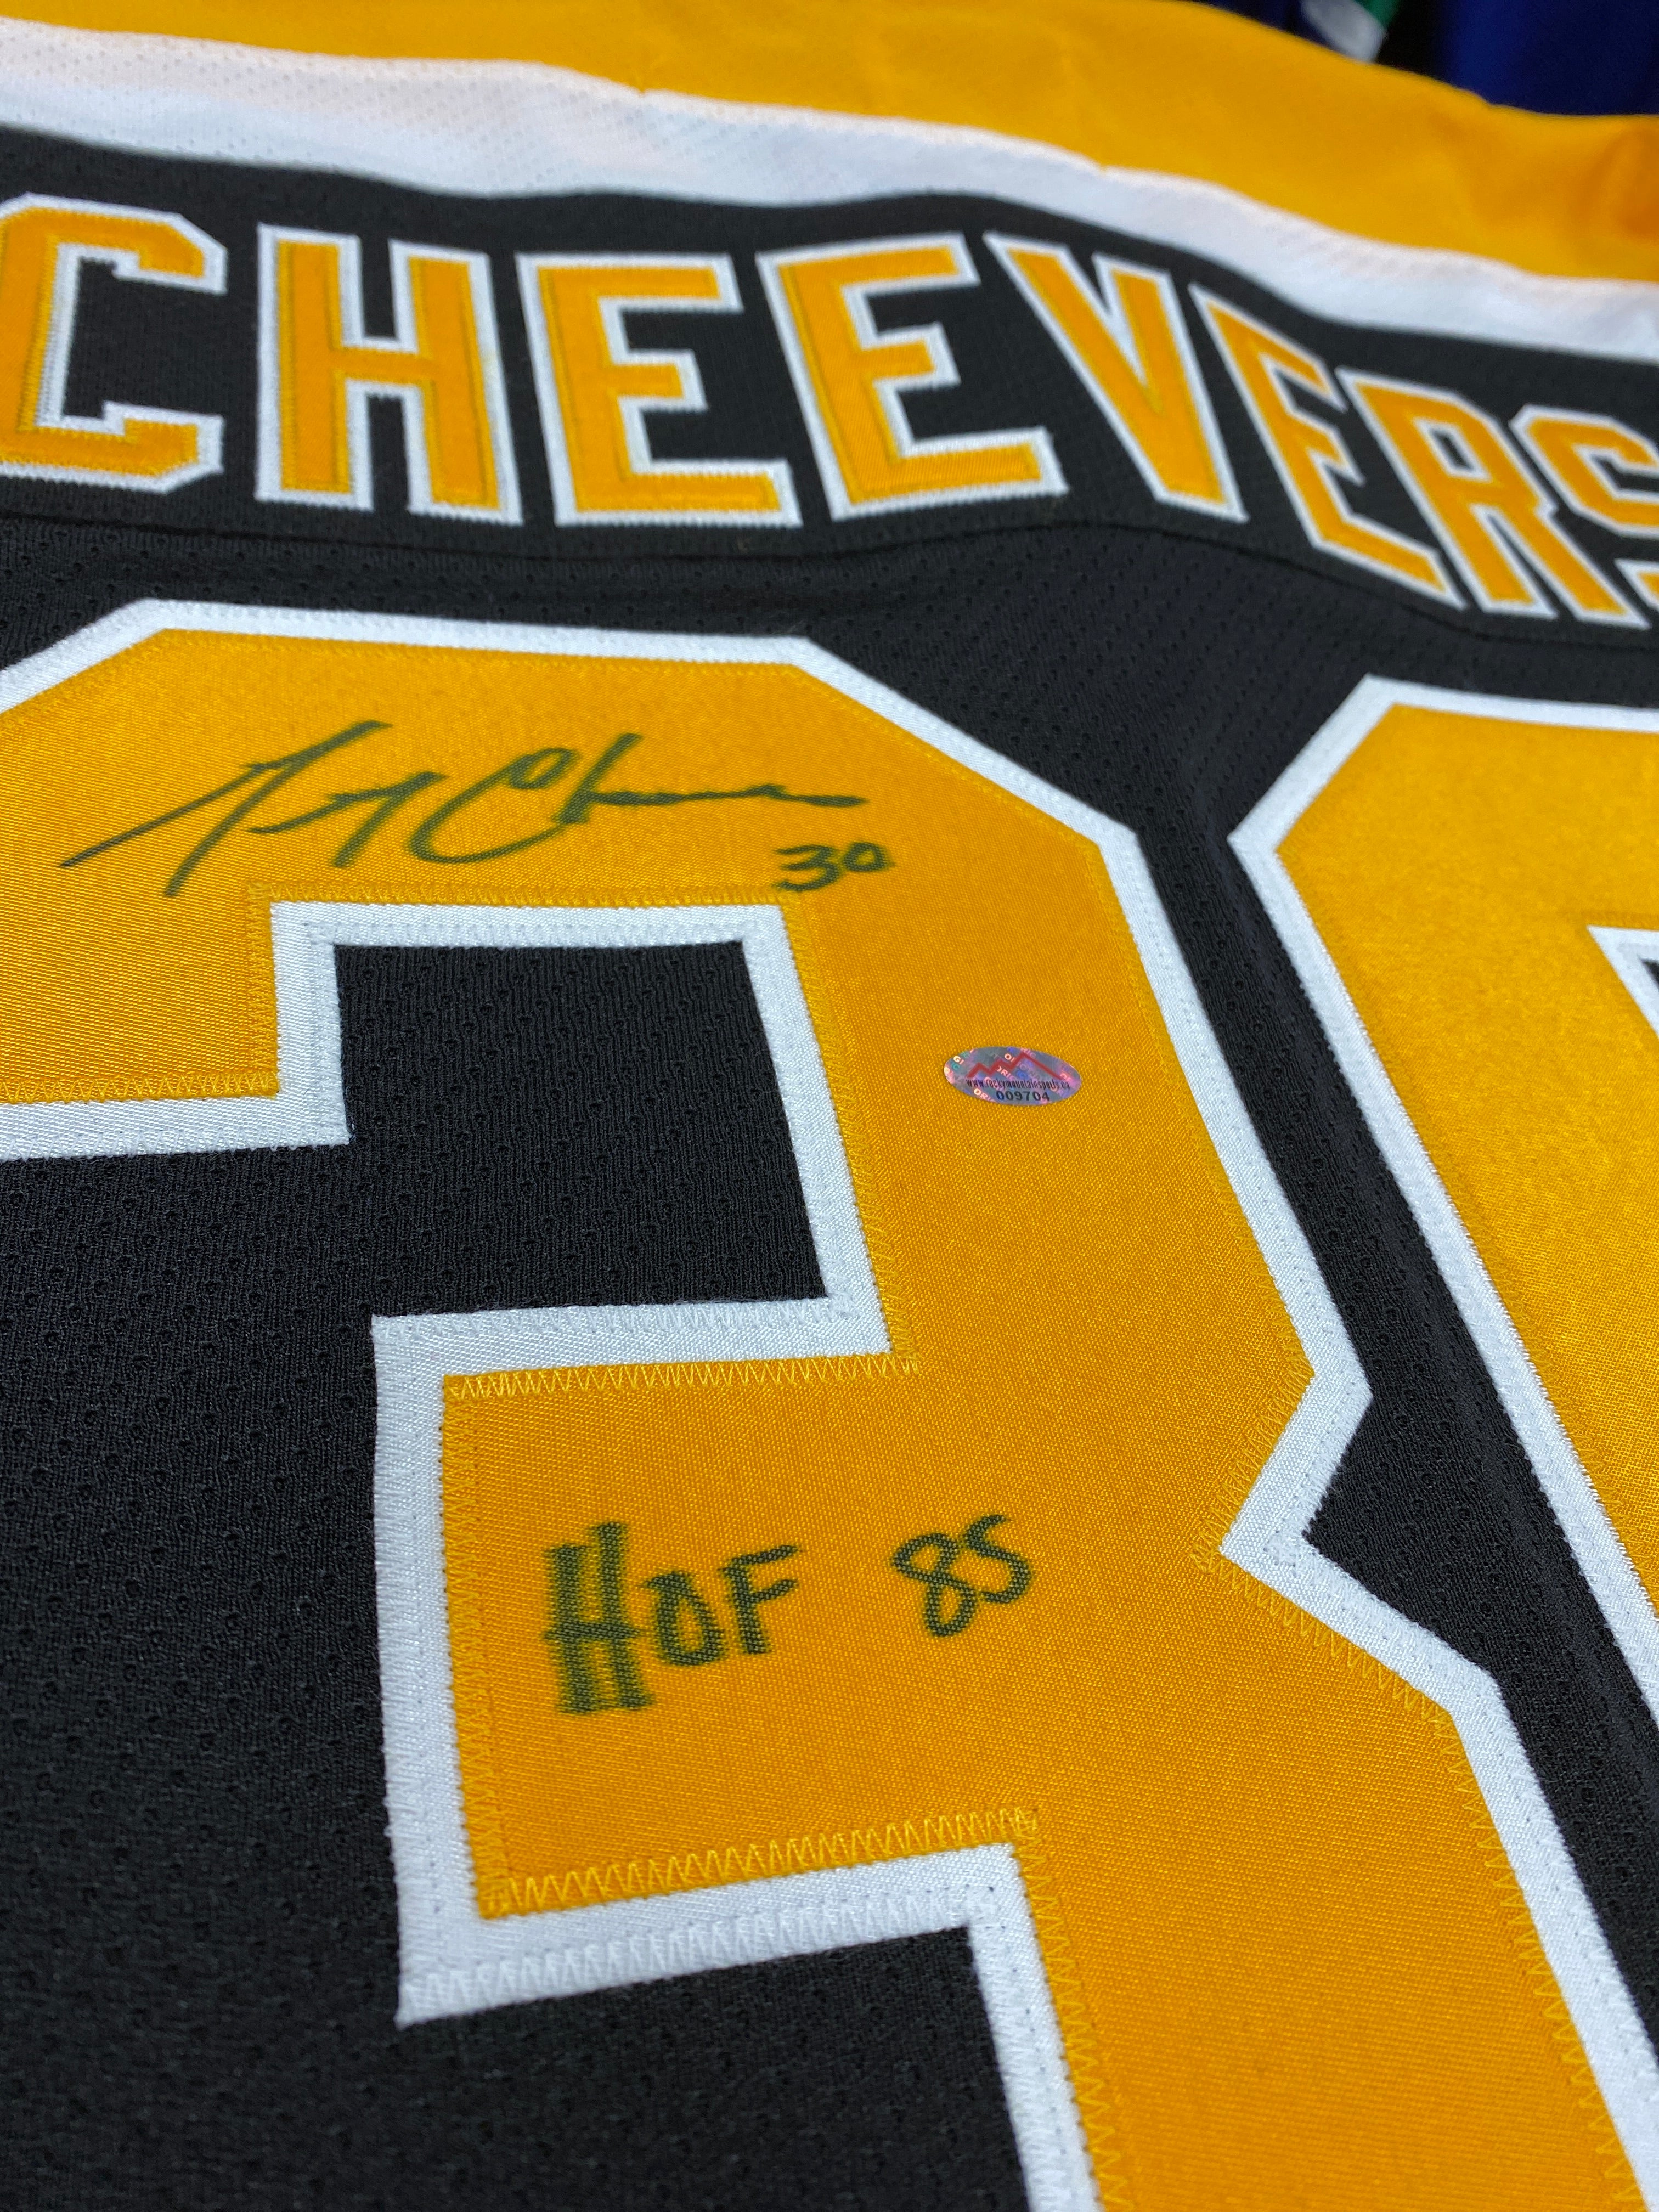 gerry cheevers jersey